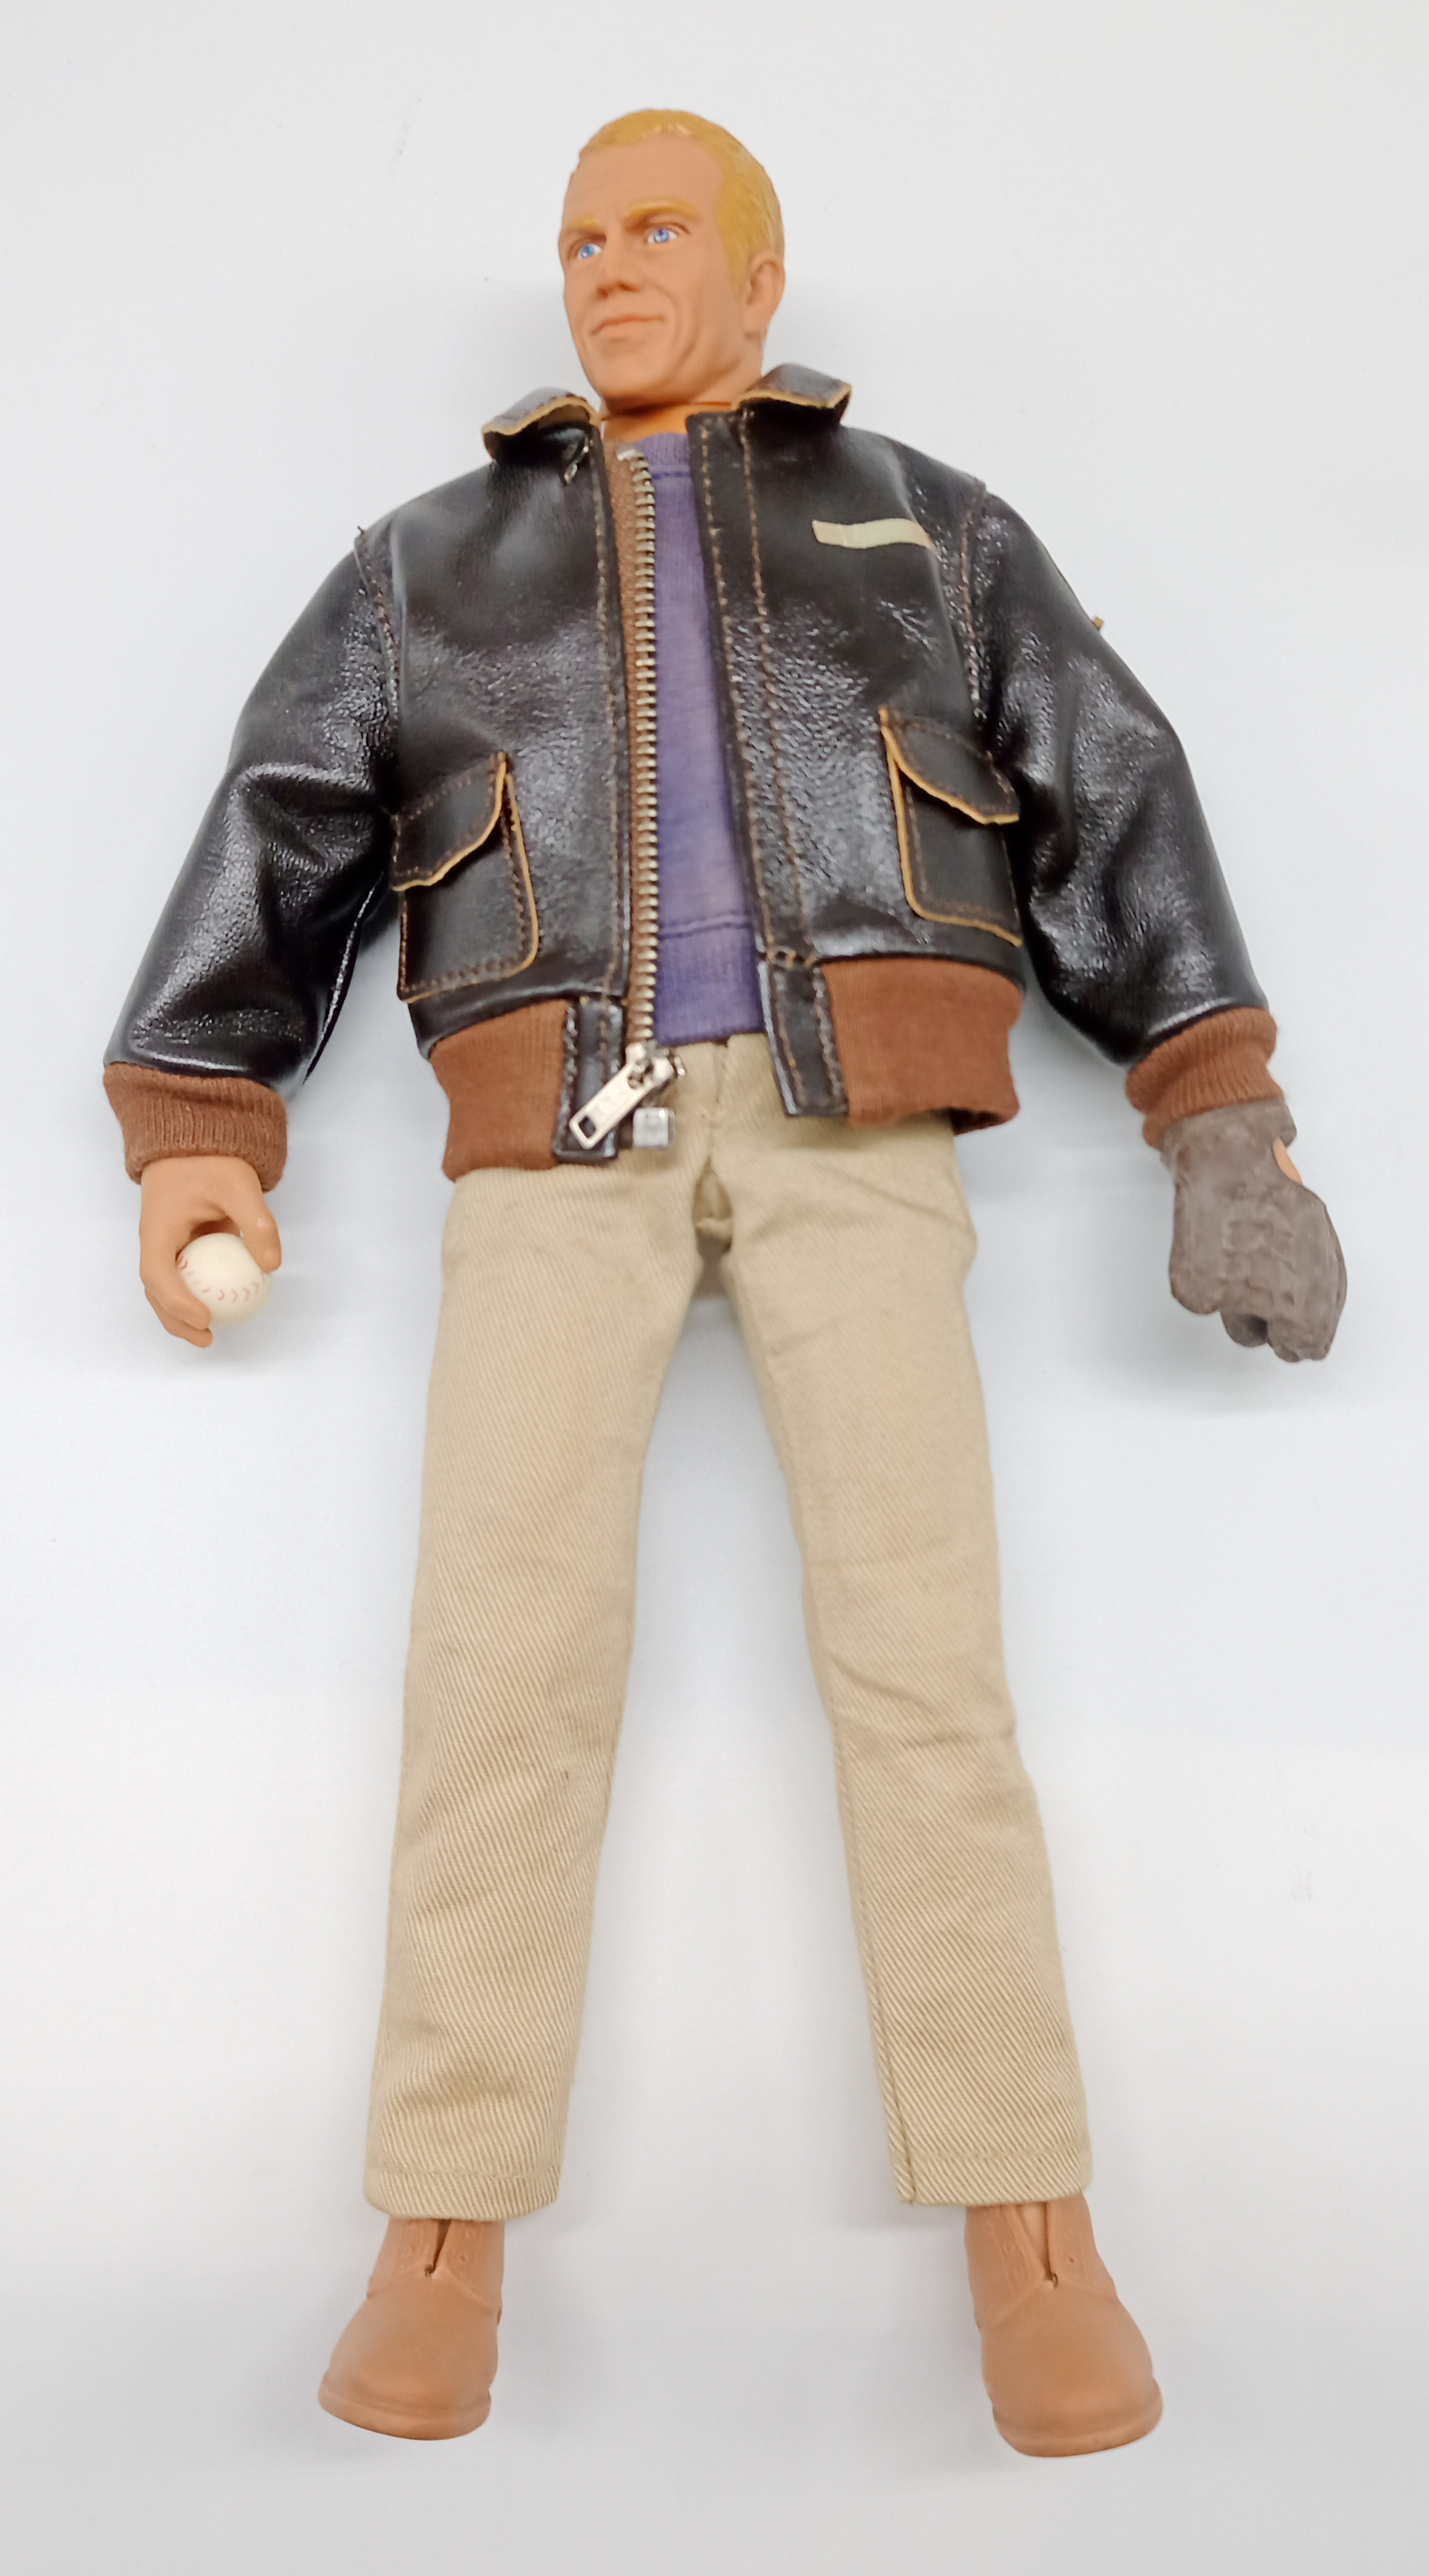 TOYS McCOY ACTION FIGURE WITH ACCESSORIES V HILTS / STEVE McQUEEN